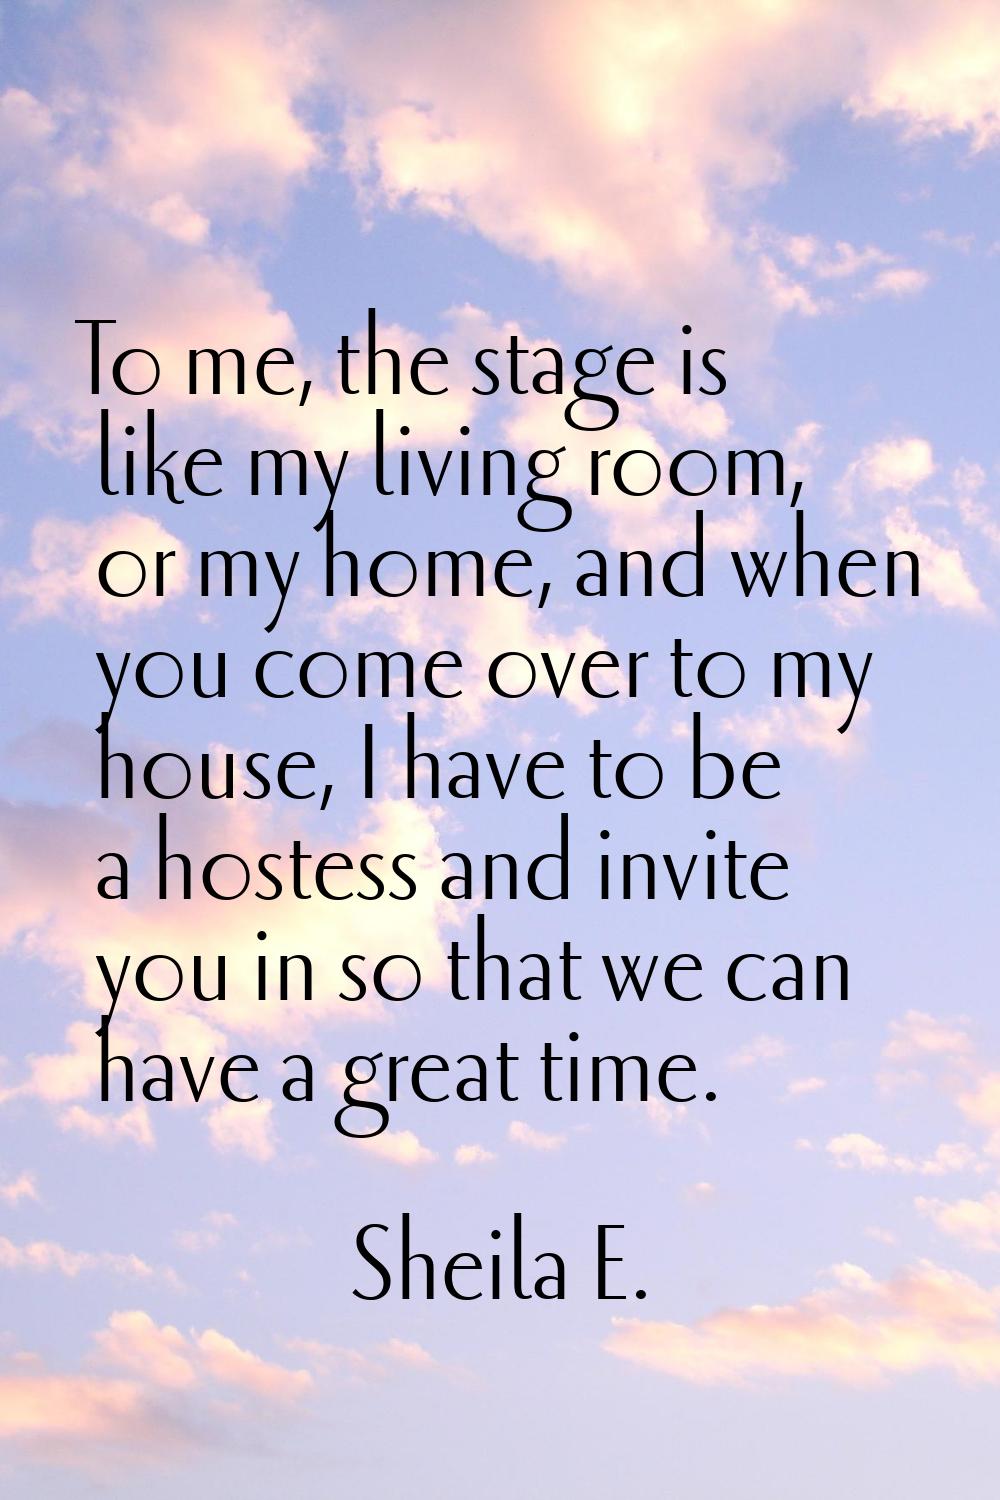 To me, the stage is like my living room, or my home, and when you come over to my house, I have to 